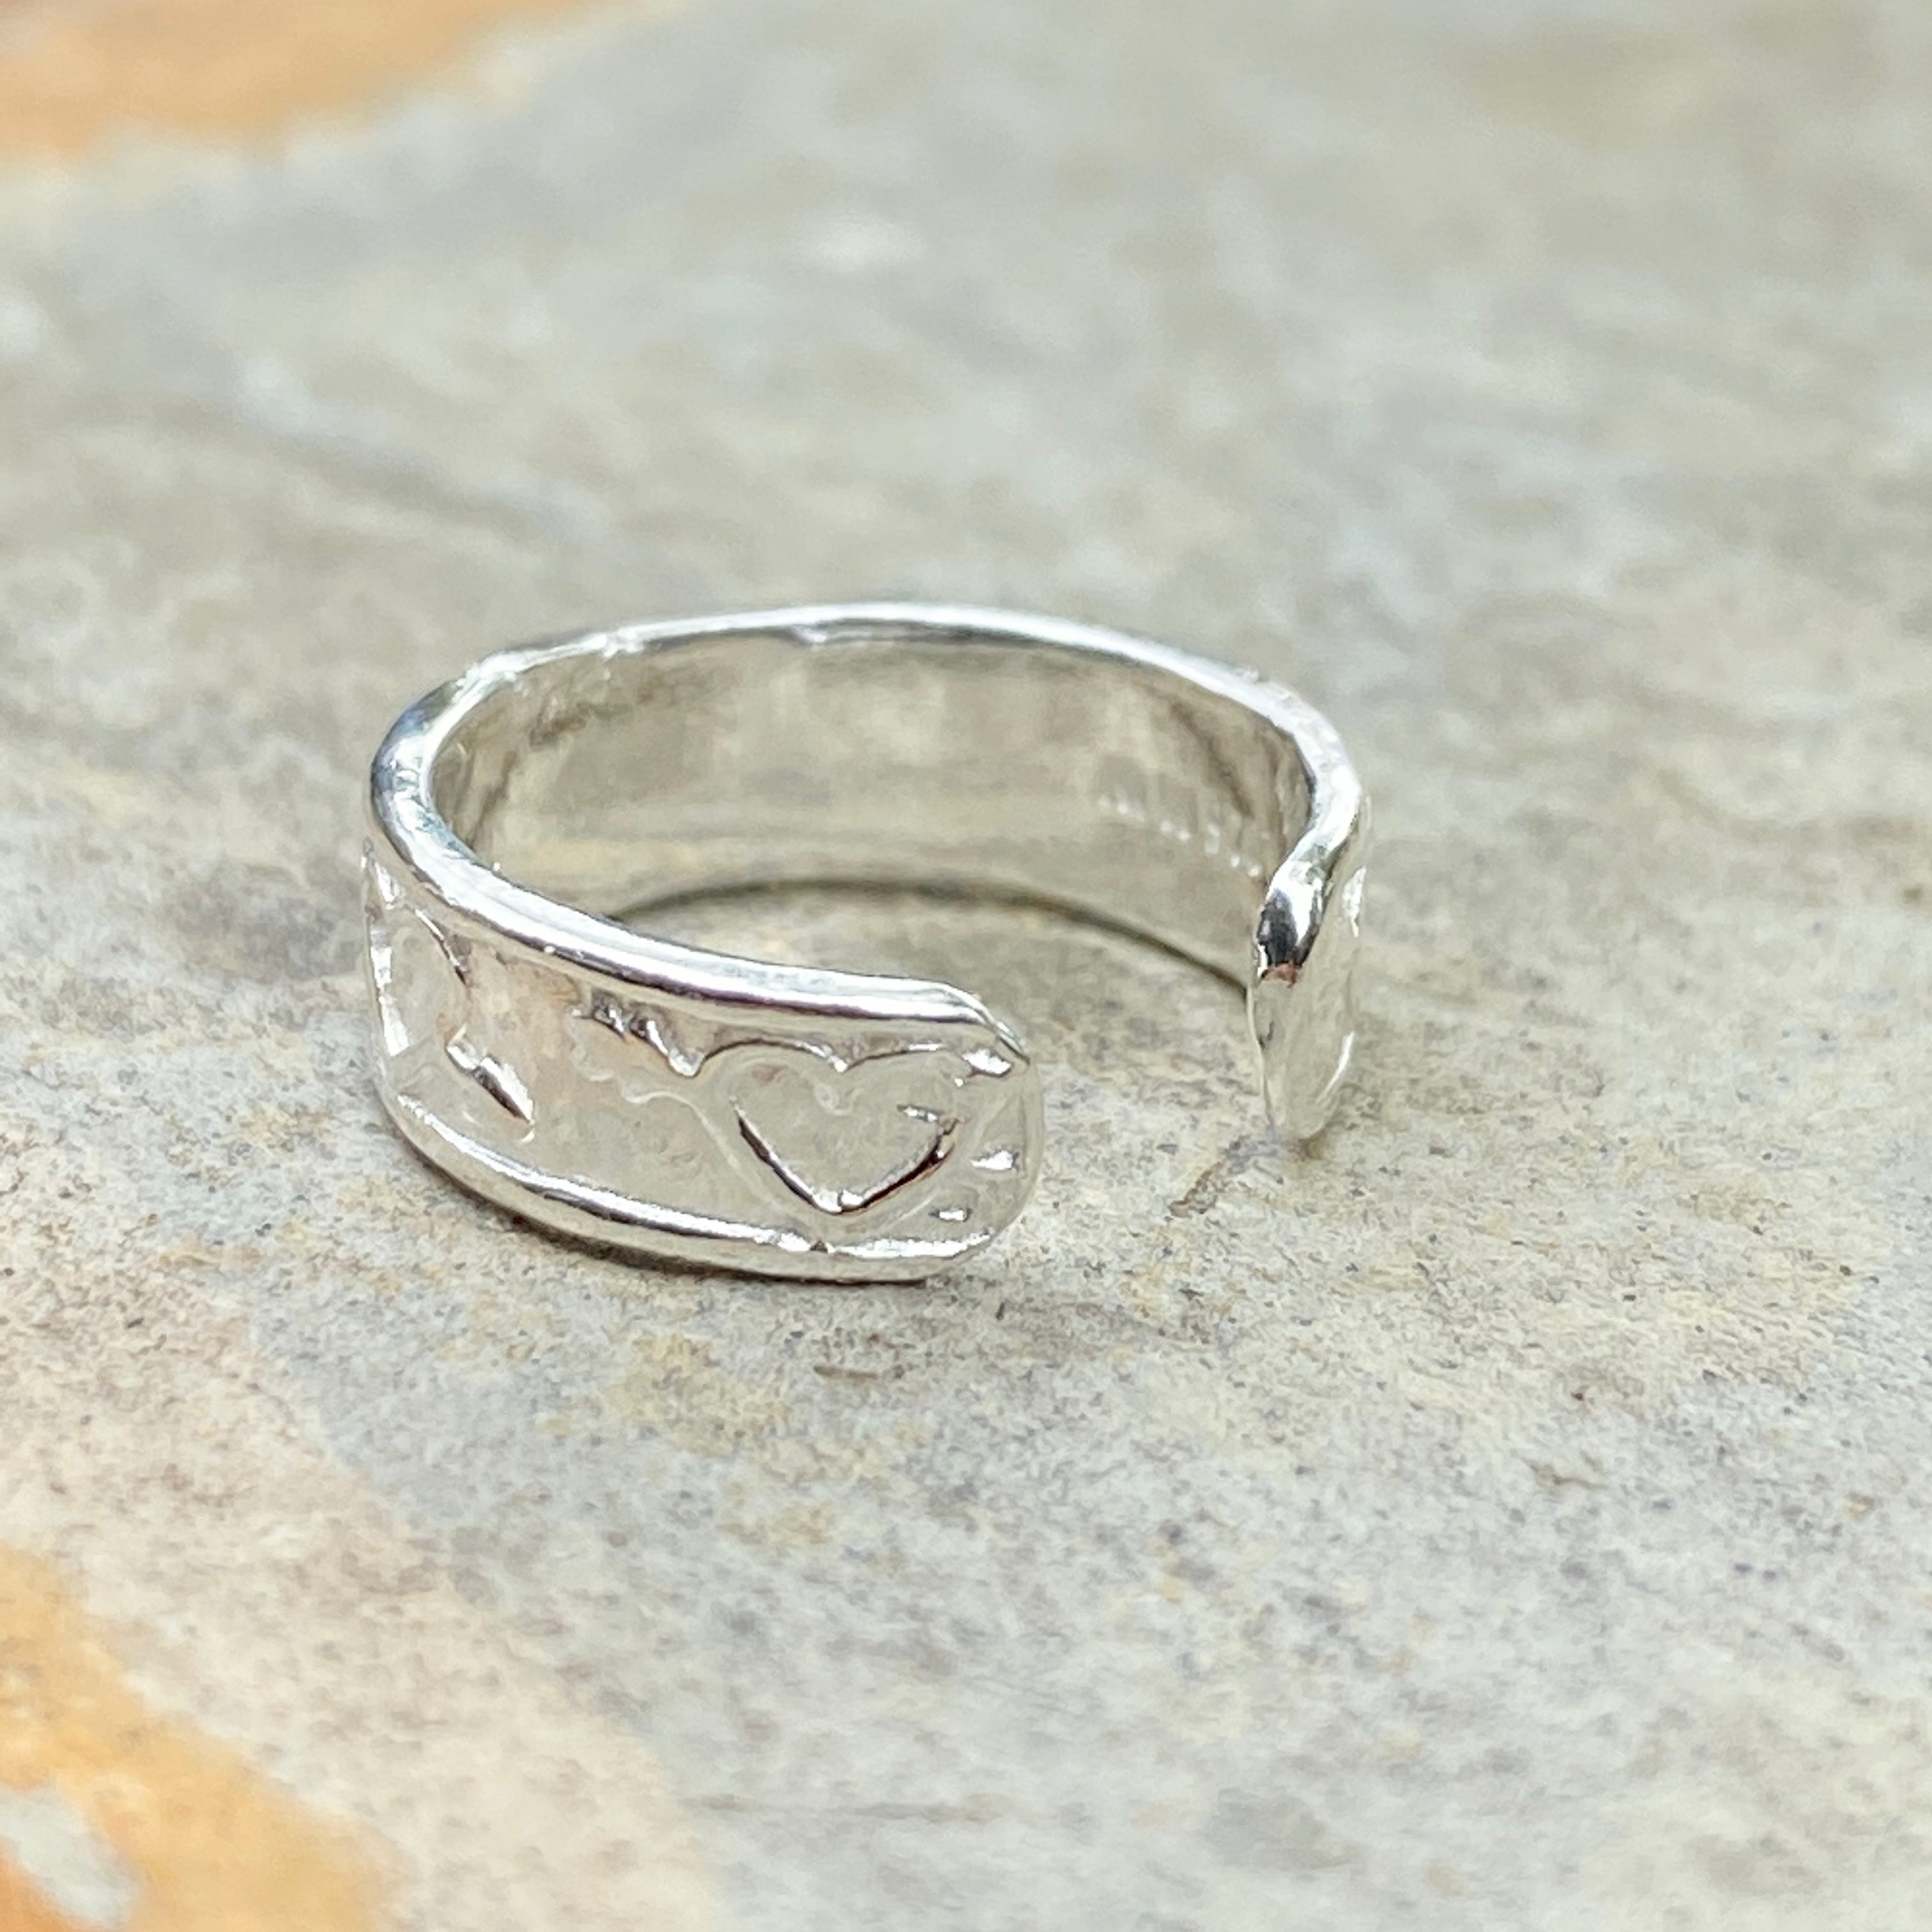 Wave Toe Ring, Sterling Silver Toe Rings, Midi Ring, Toe Rings for Women,  Ocean Ring, Dainty Ring, Minimalist Ring, Gift for Nature Lovers - Etsy